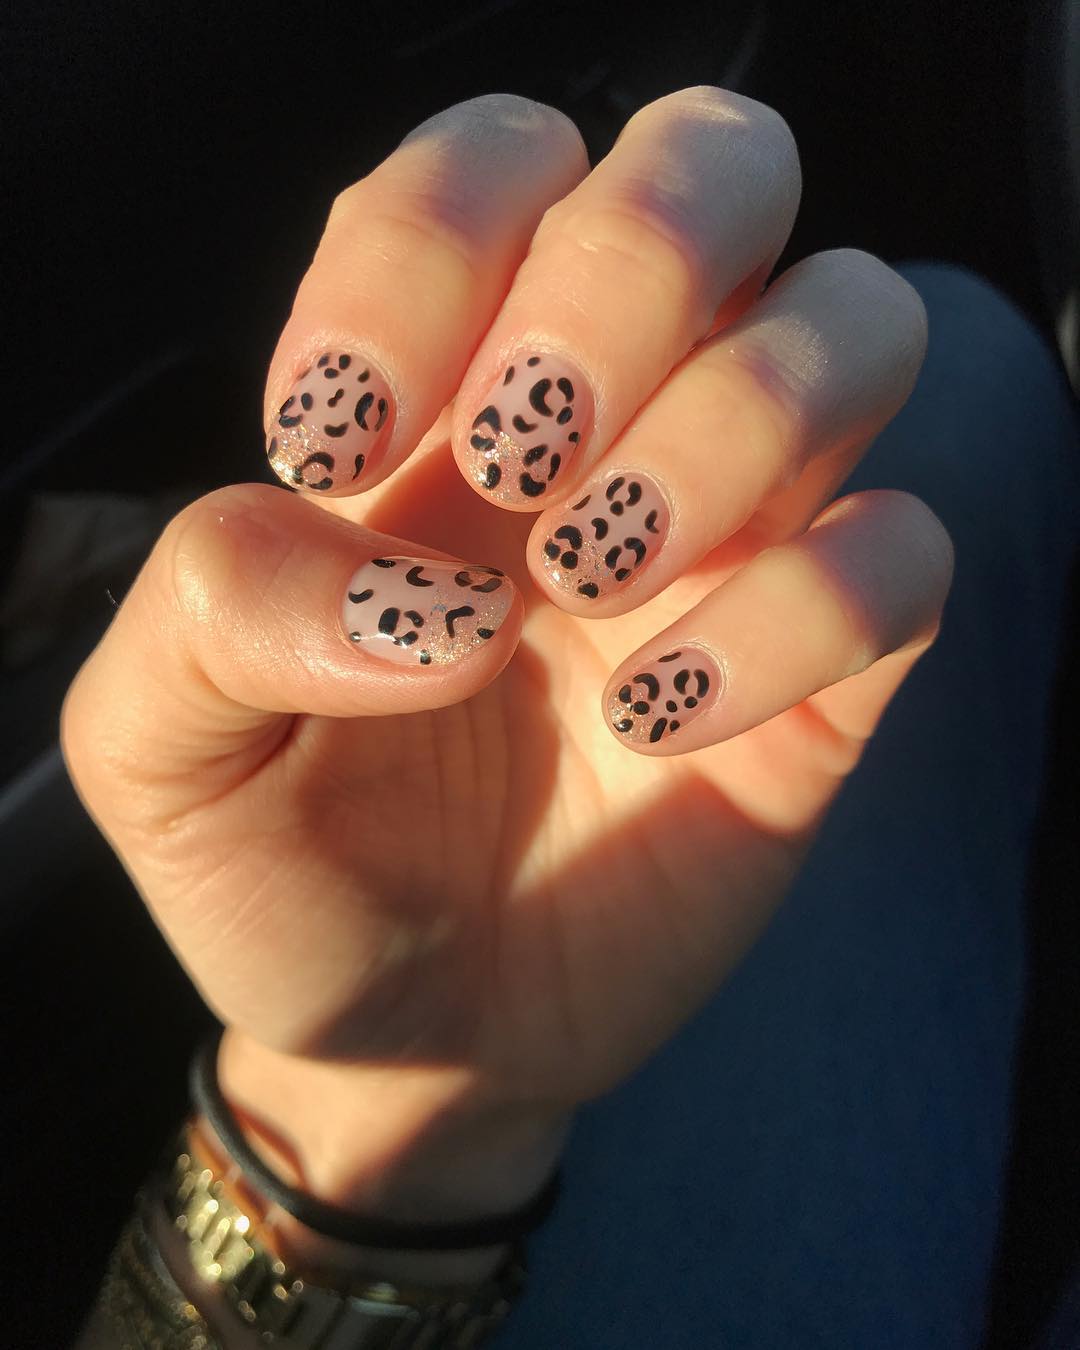 Animal-Print Nail Art Is Your Go-To Summer Accessory